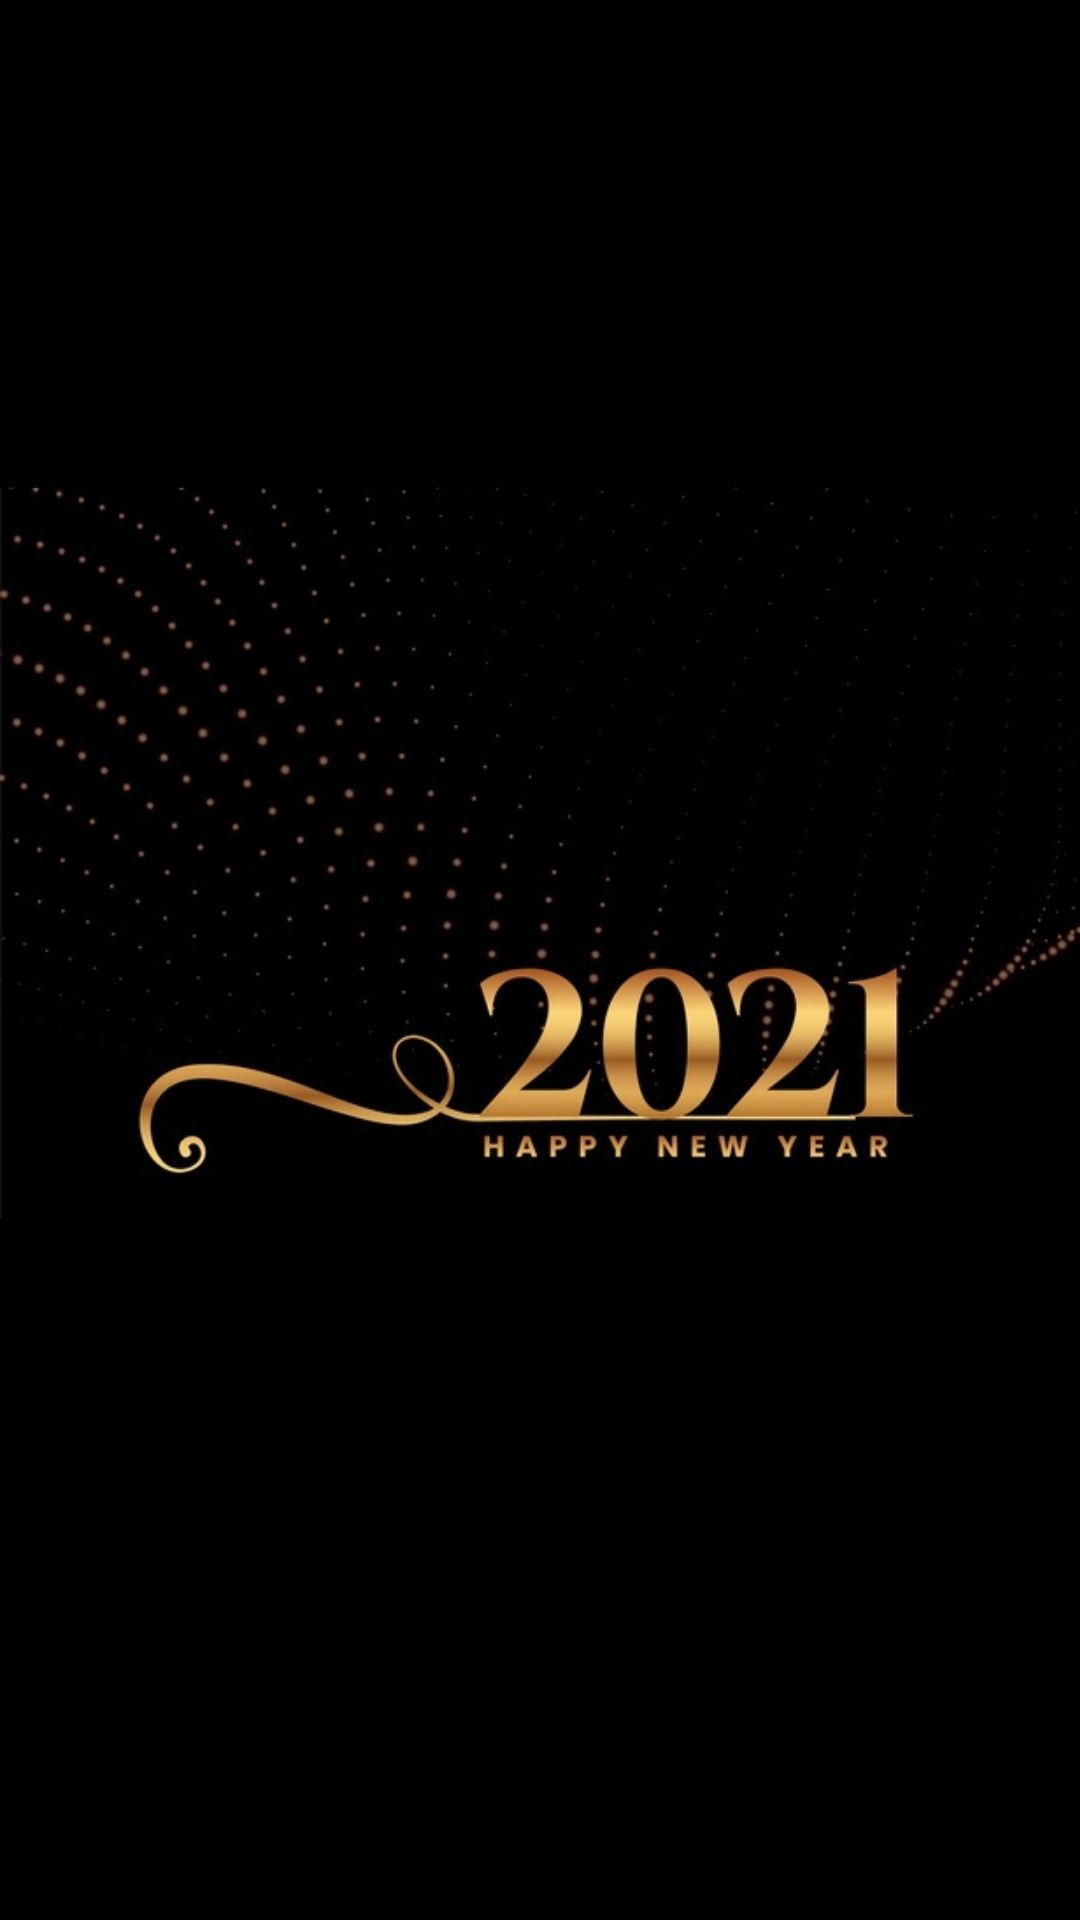 New year wallpaper HD background 2021. New year wallpaper hd, New year wallpaper, Happy new year picture